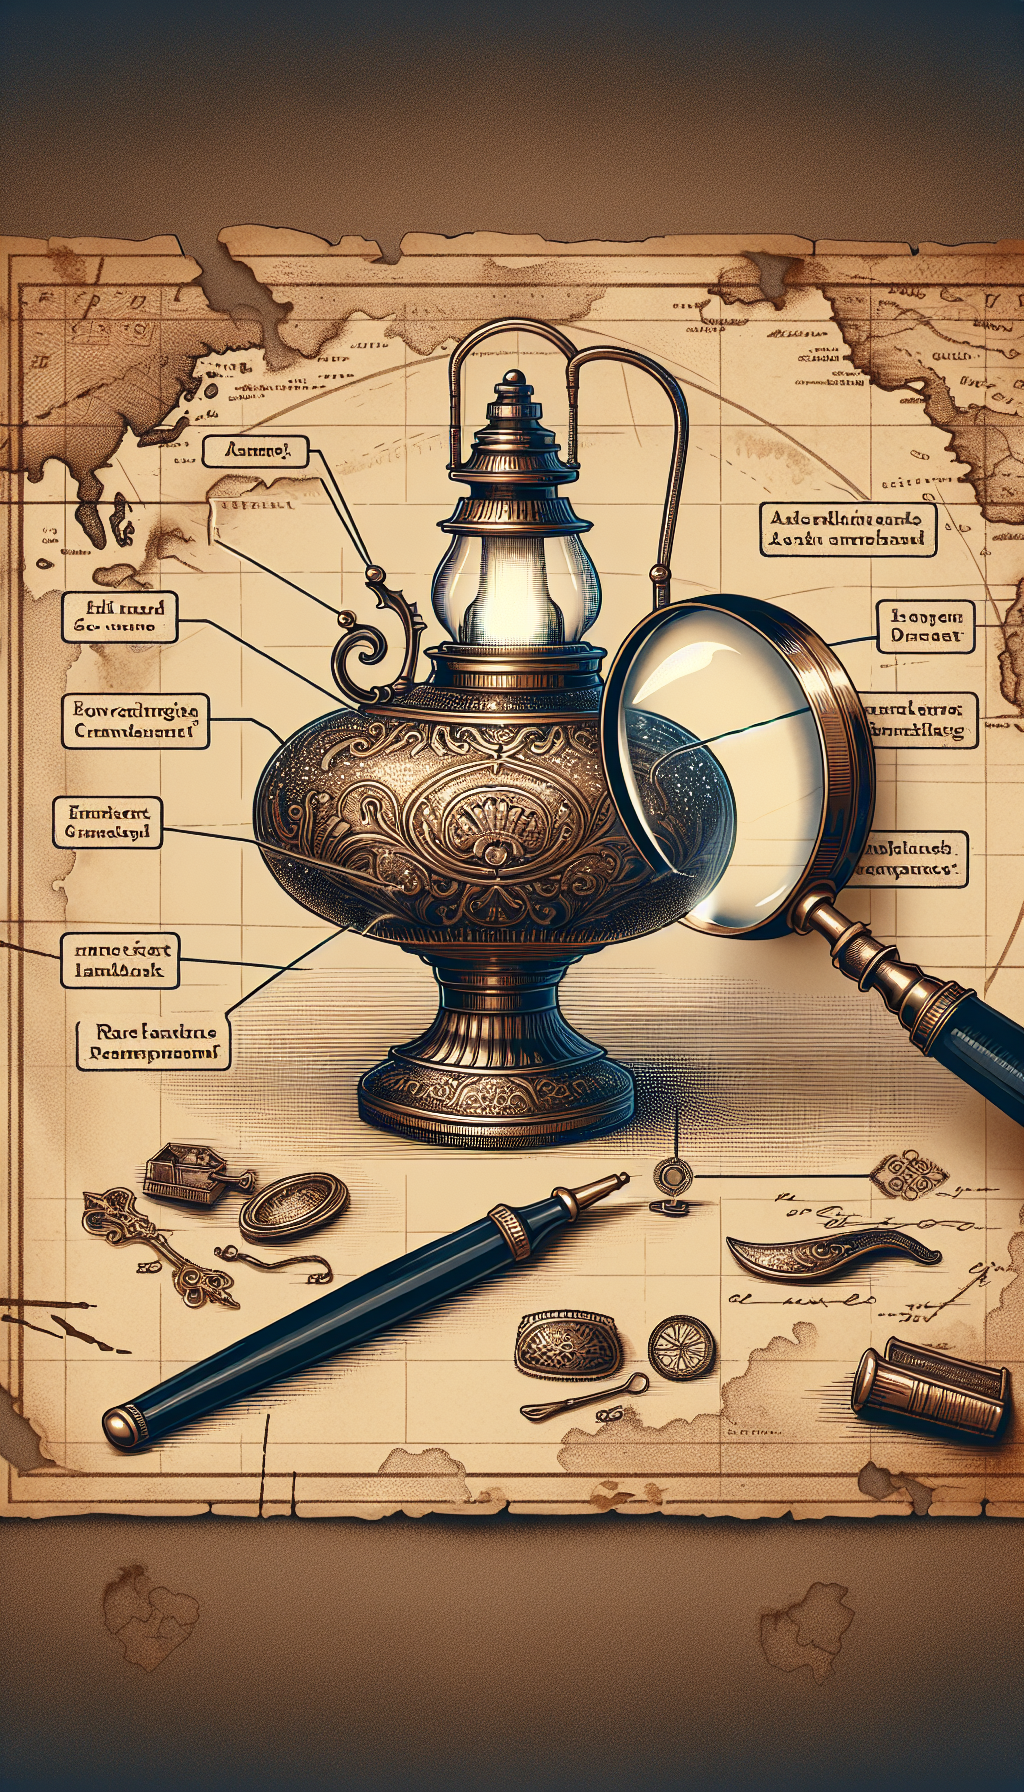 An illustration depicts a vintage, ornately decorated oil lamp, positioned beneath an oversized magnifying glass that reveals shimmering, previously unseen details and markings. Accompanying the lamp are small labels highlighting its unique attributes like "1860's craftsmanship" or "rare maker's mark," all against the backdrop of a faded treasure map, subtly conveying the concept of discovering the valuable antique's rarity and worth.